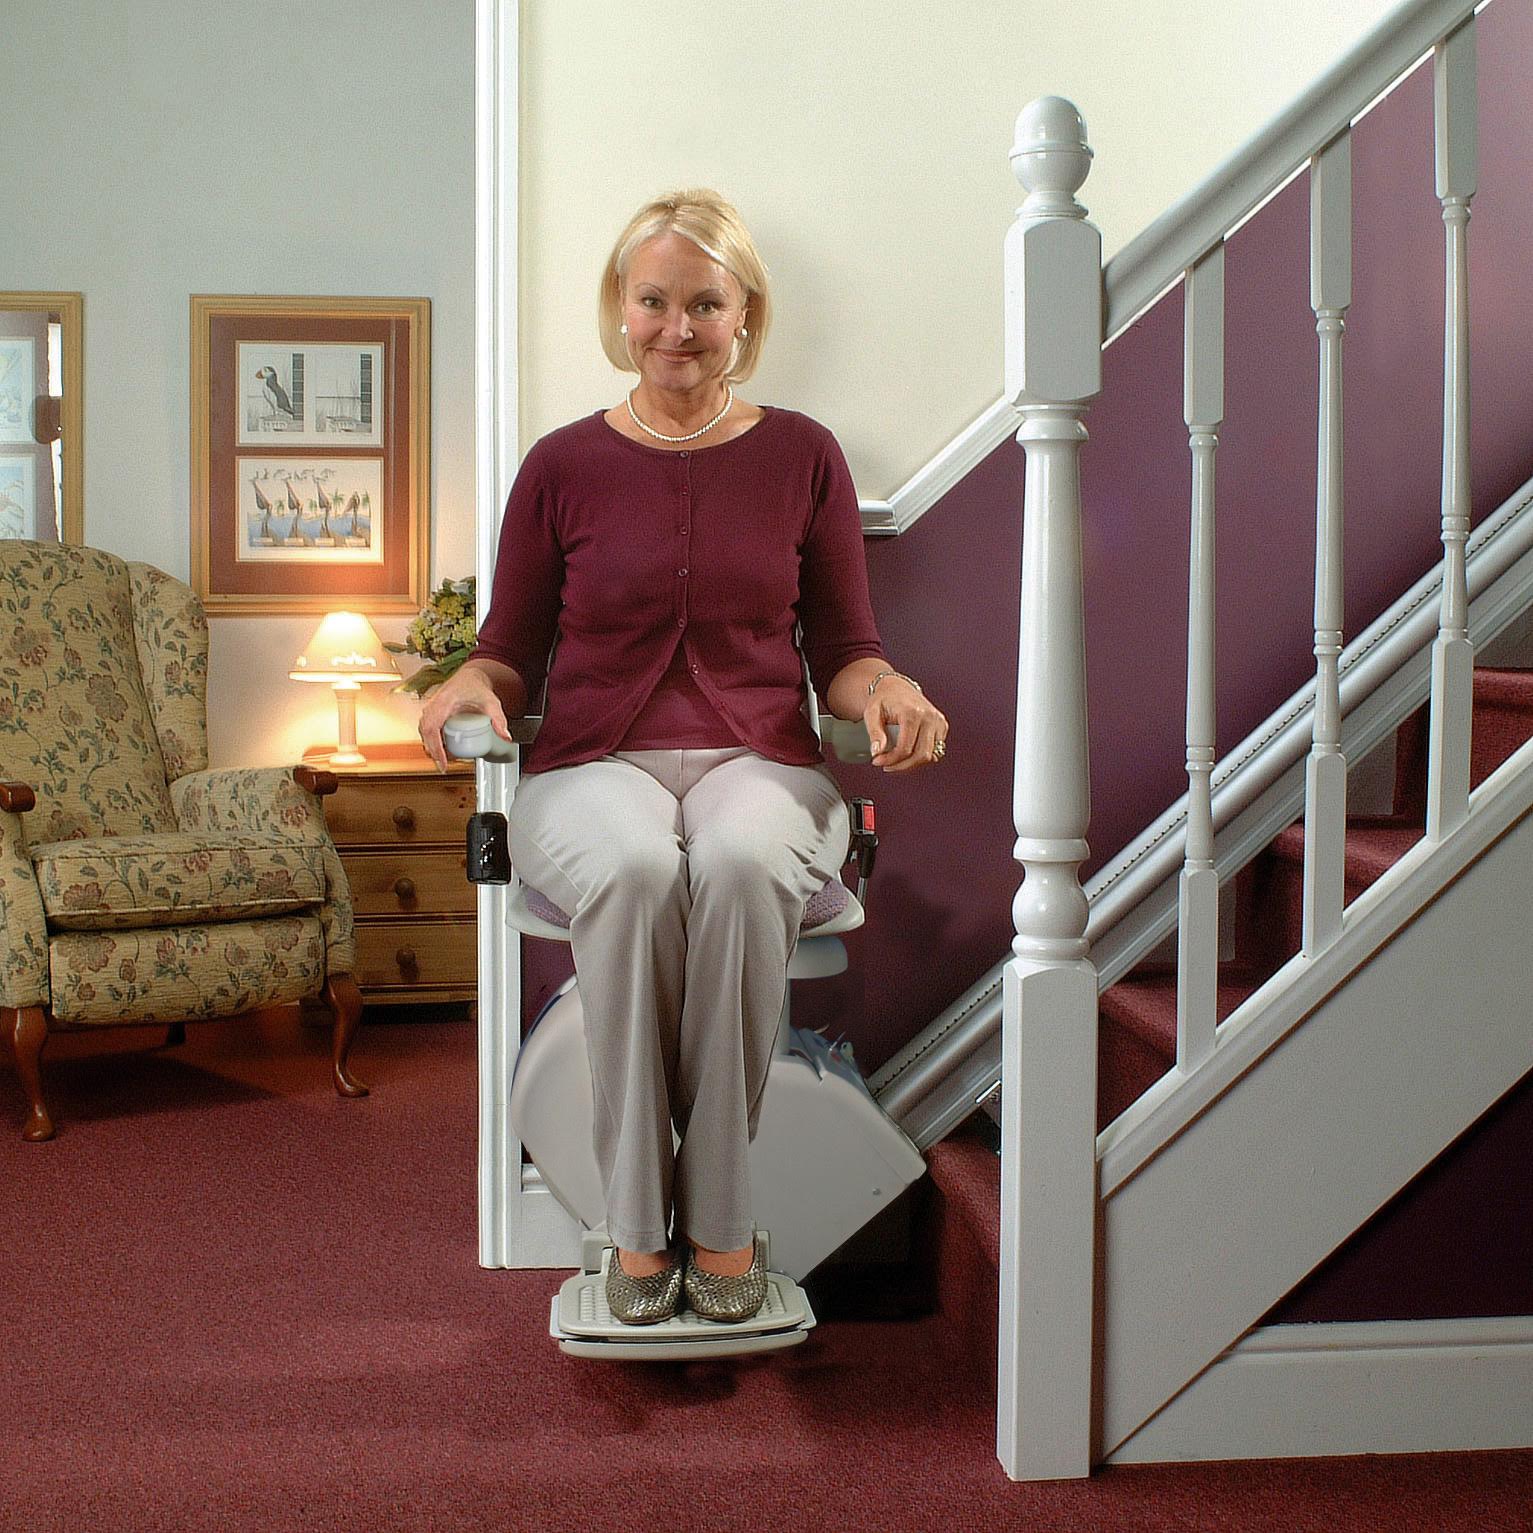 YouTube Stair Lift are home residential indoor stairway staircase glides